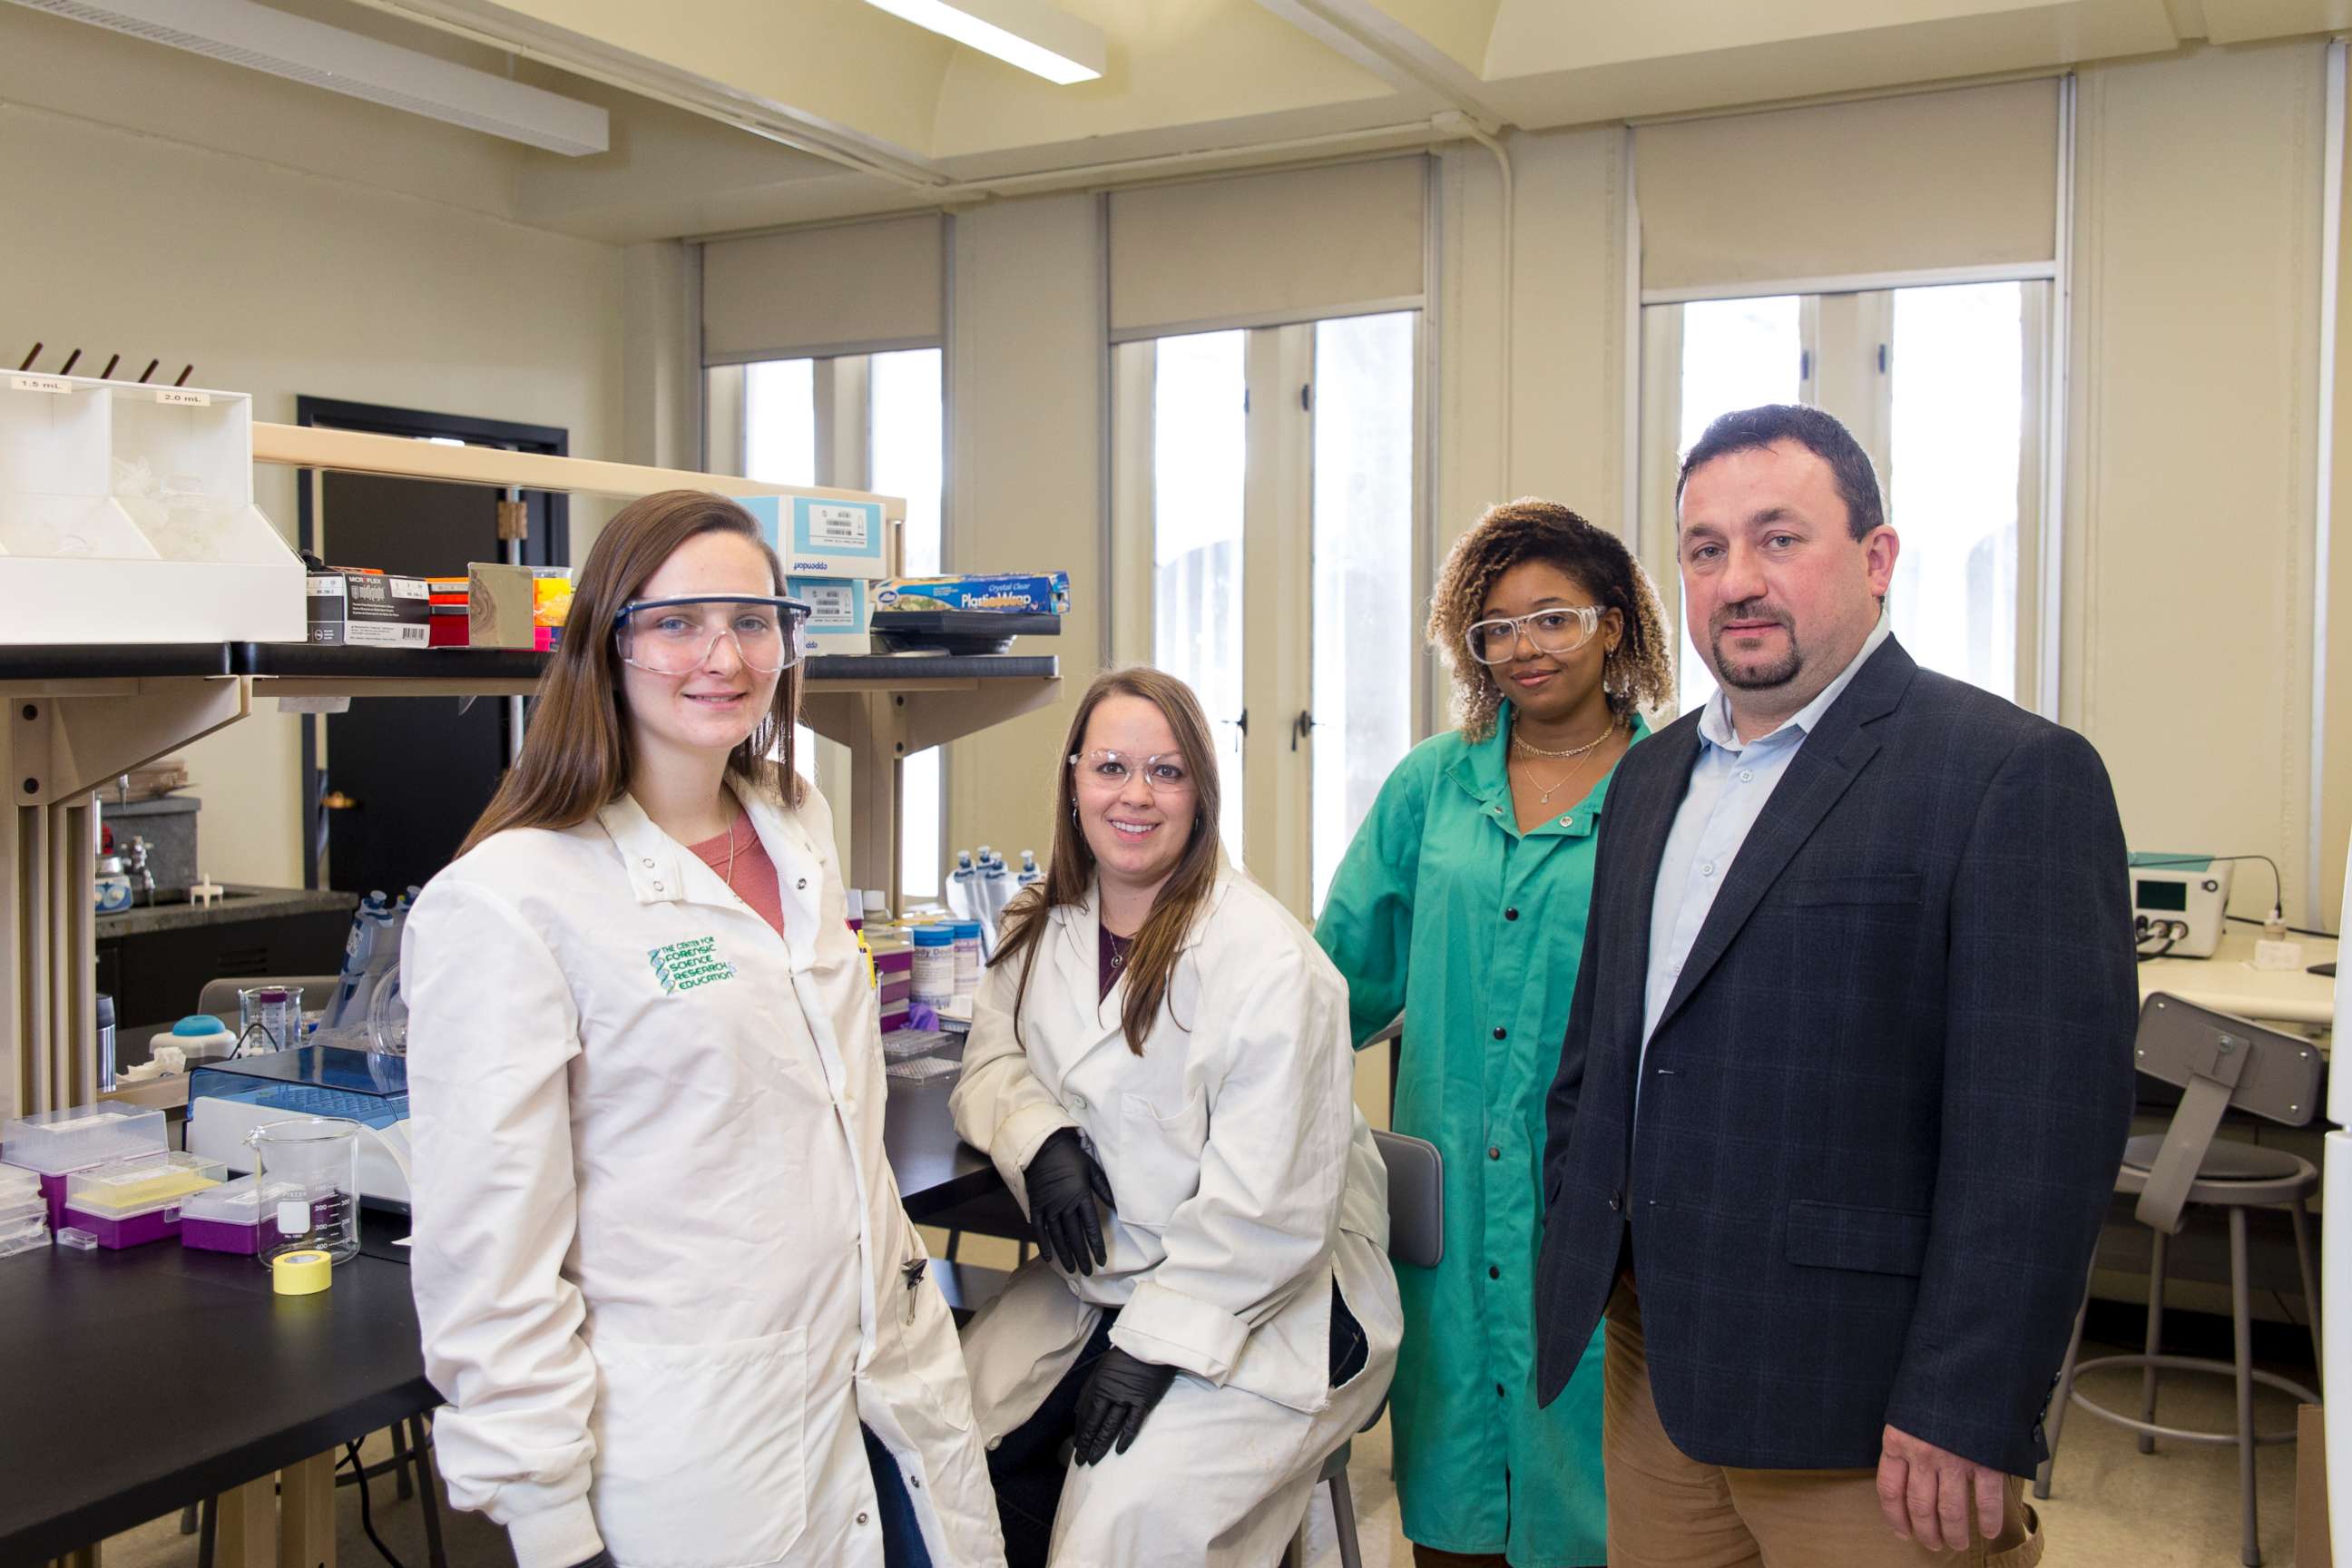 PHOTO: Assistant Professor Jan Halamek, Ph.D, working with Erica Brunelle, 4th year Chemistry PhD candidate; Mindy Hair, 2nd year Chemistry PhD candidate; and Adrianna Mathis '18 Chemistry, Nov. 2, 2017. 